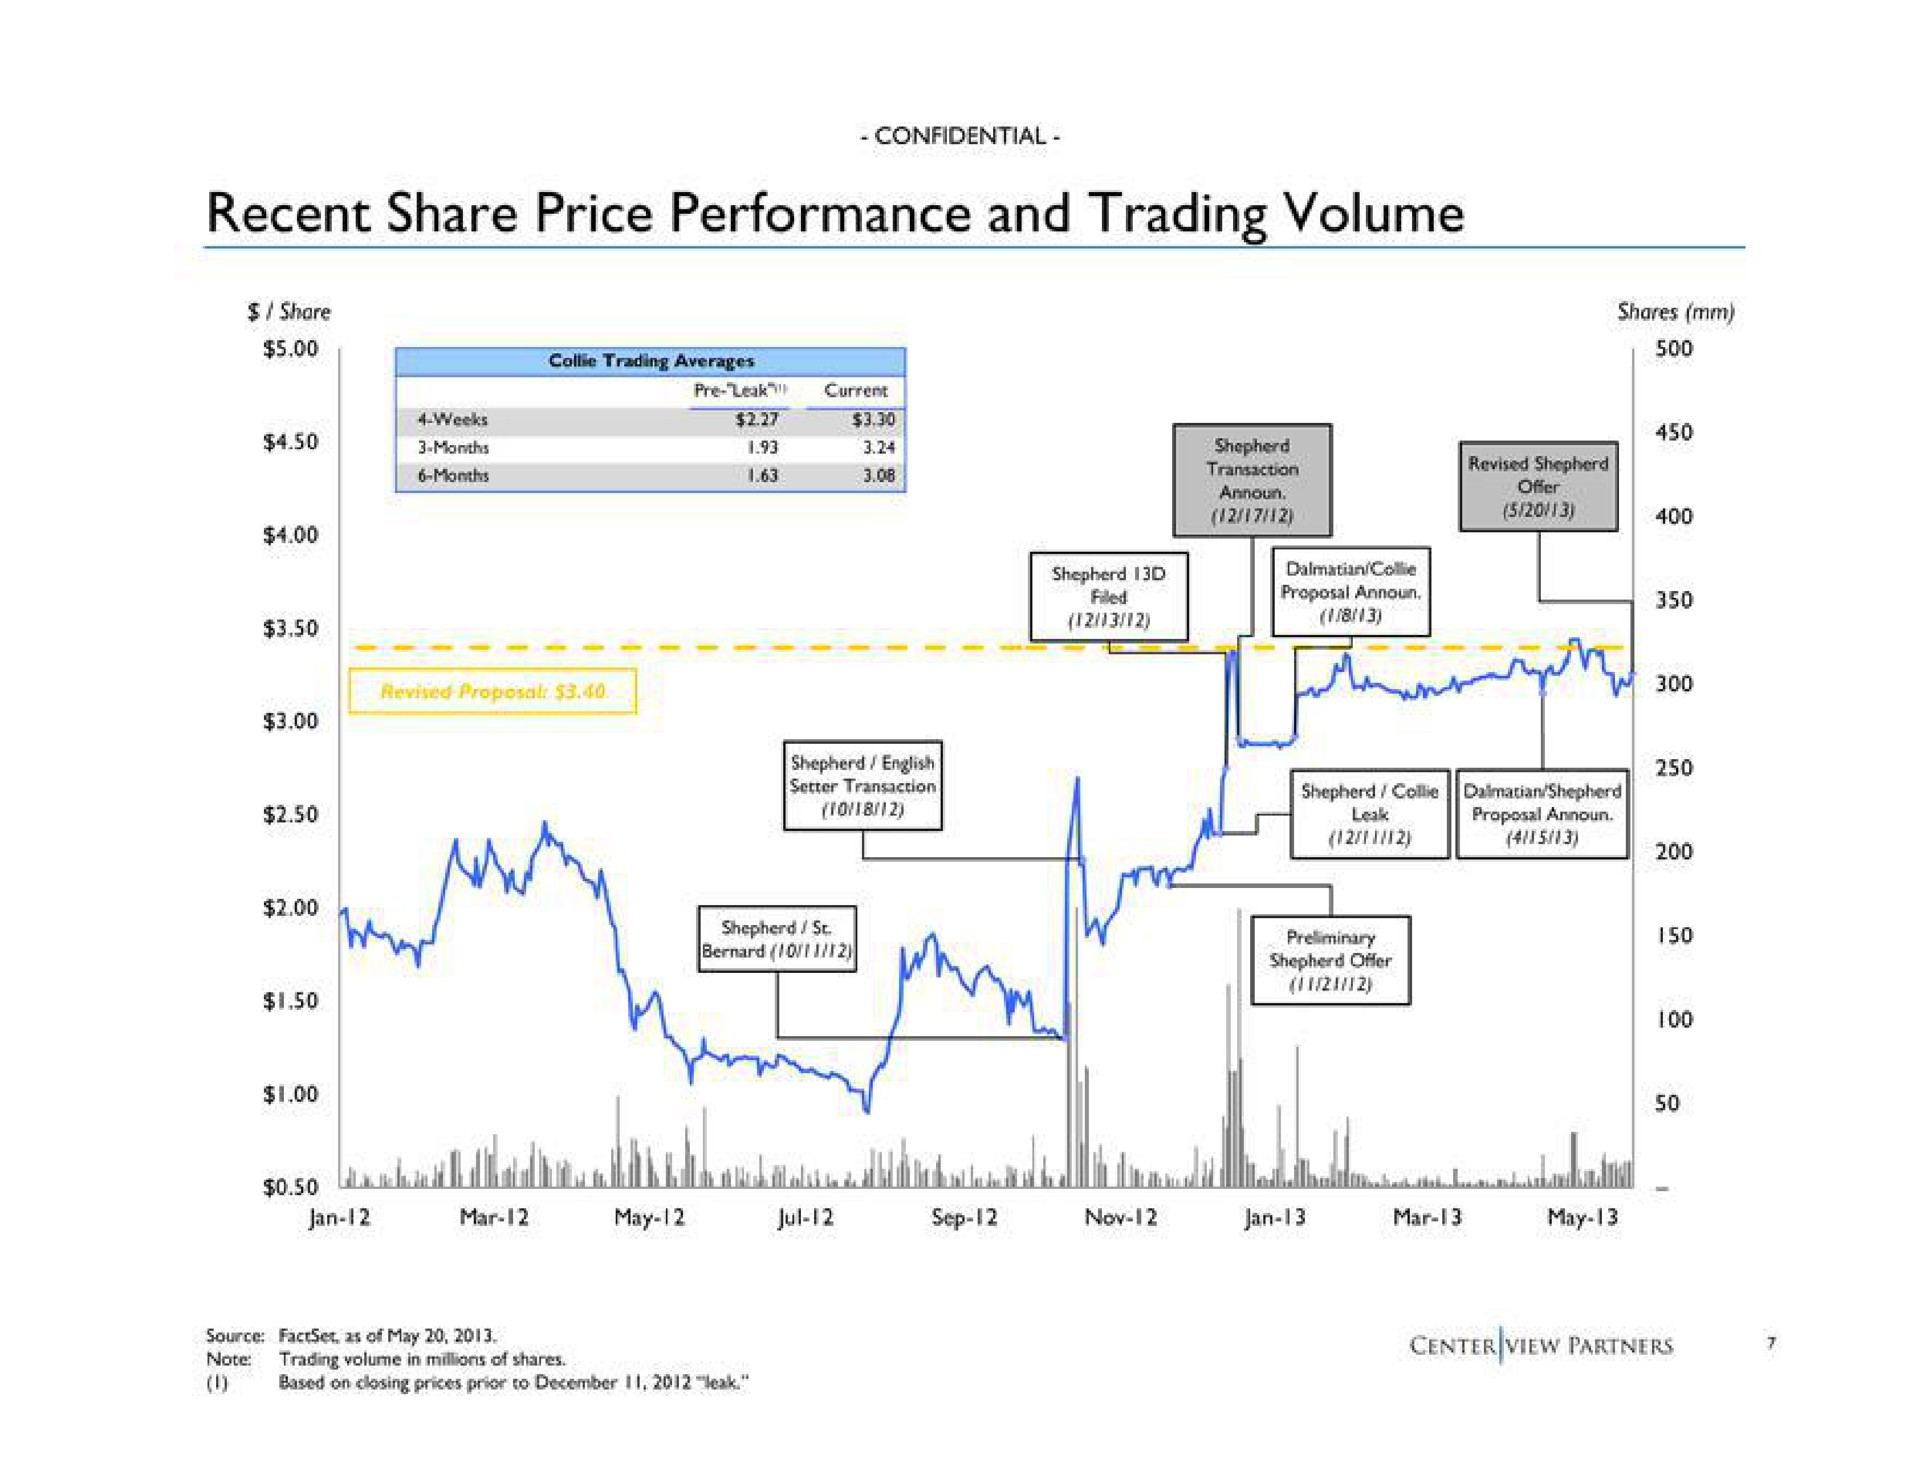 recent share price performance and trading volume | Centerview Partners